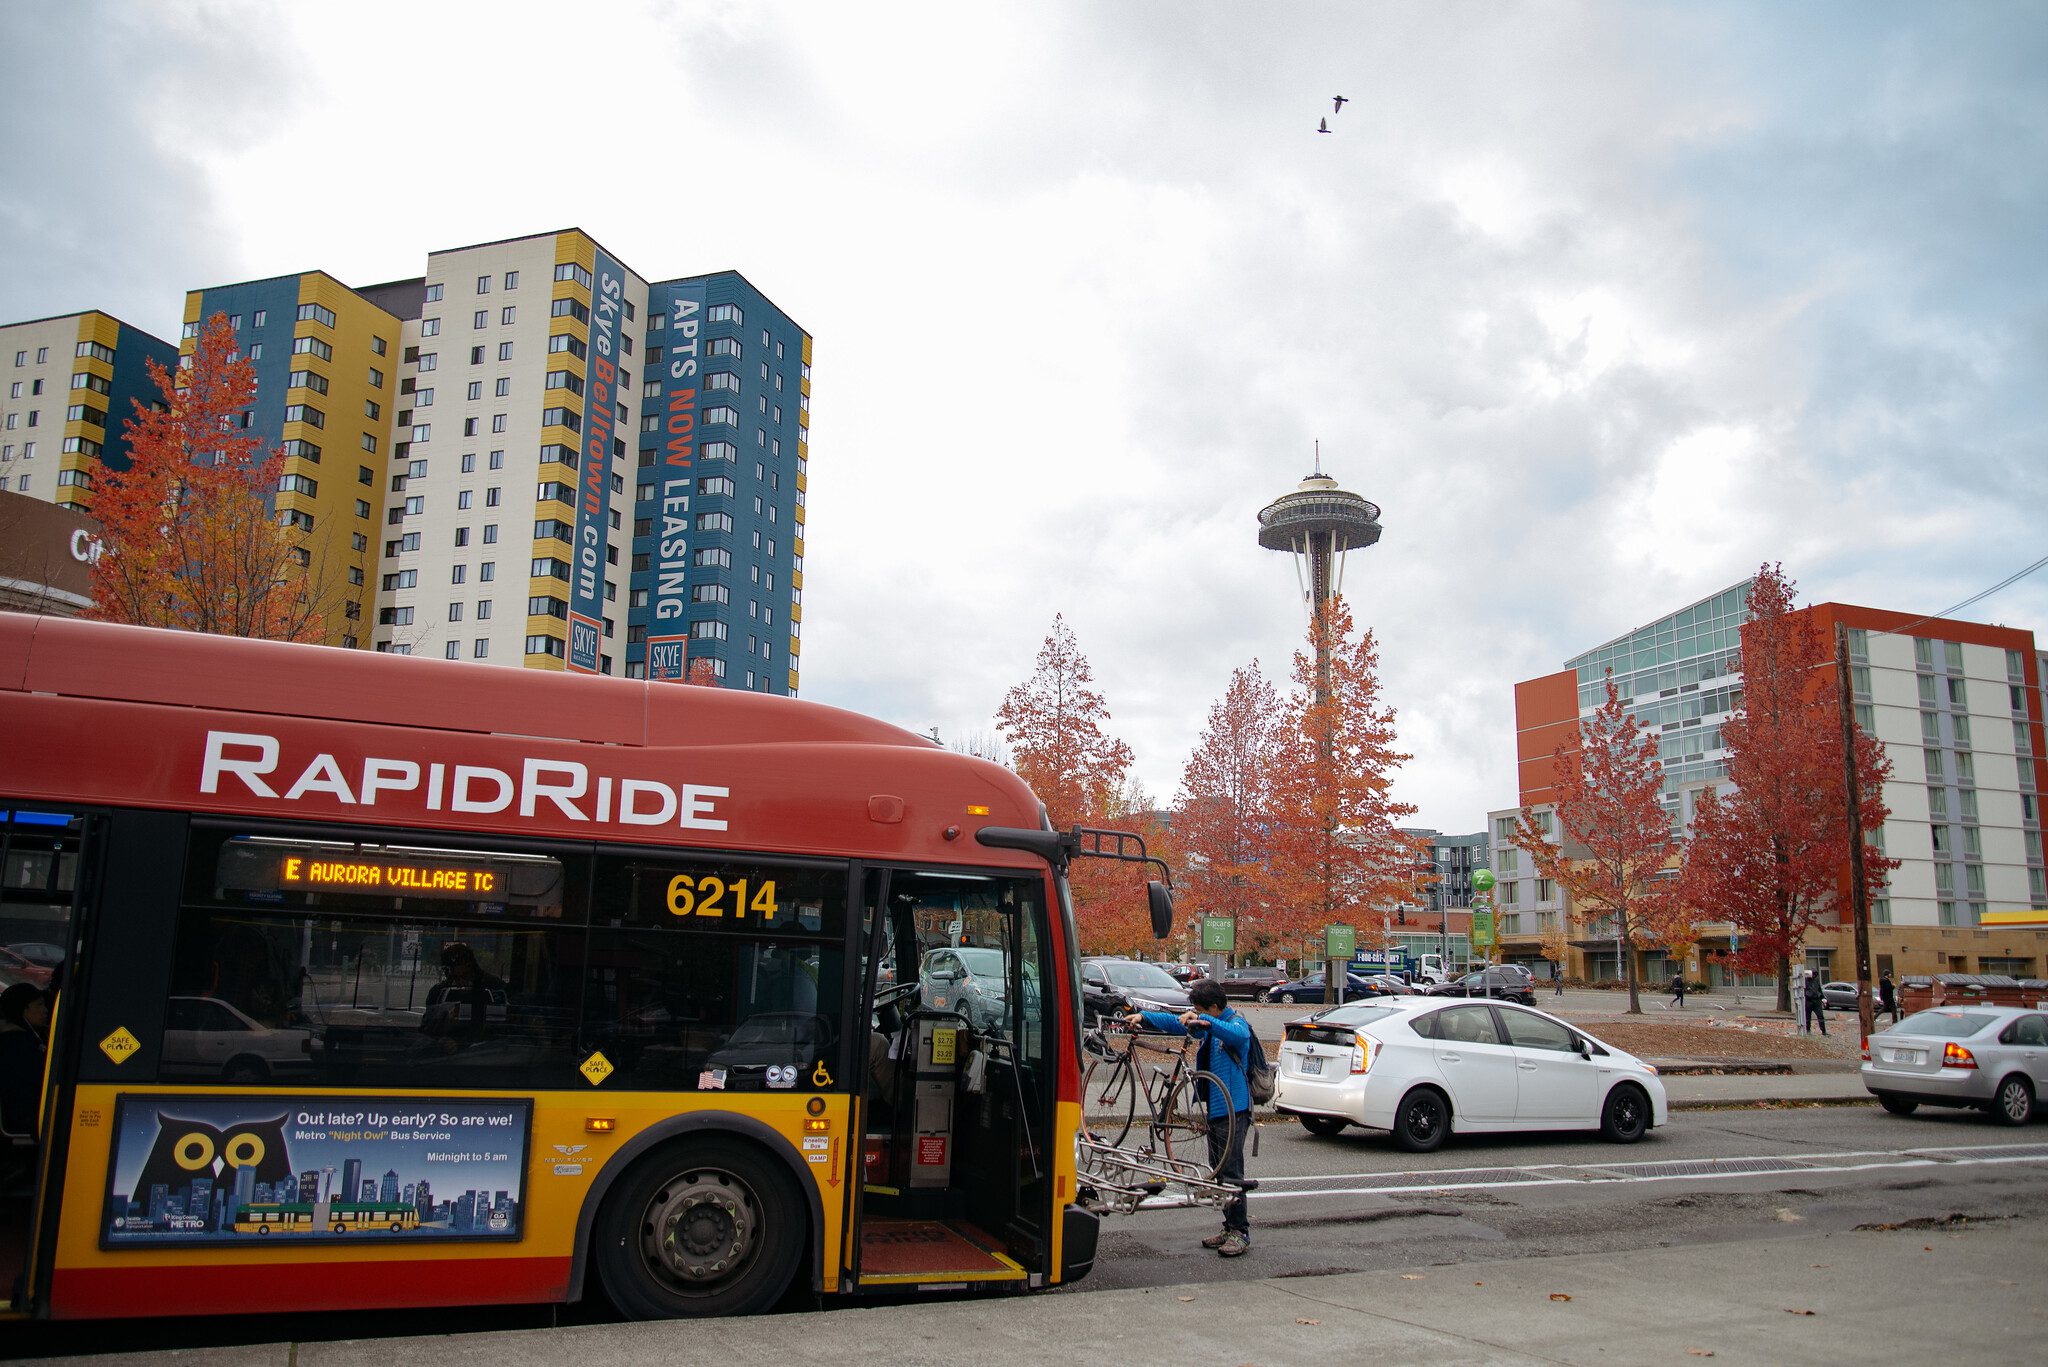 A person loads their bike and prepares to ride the northbound RapidRide E Line bus. The Space Needle stands tall in the background, alongside several large buildings.